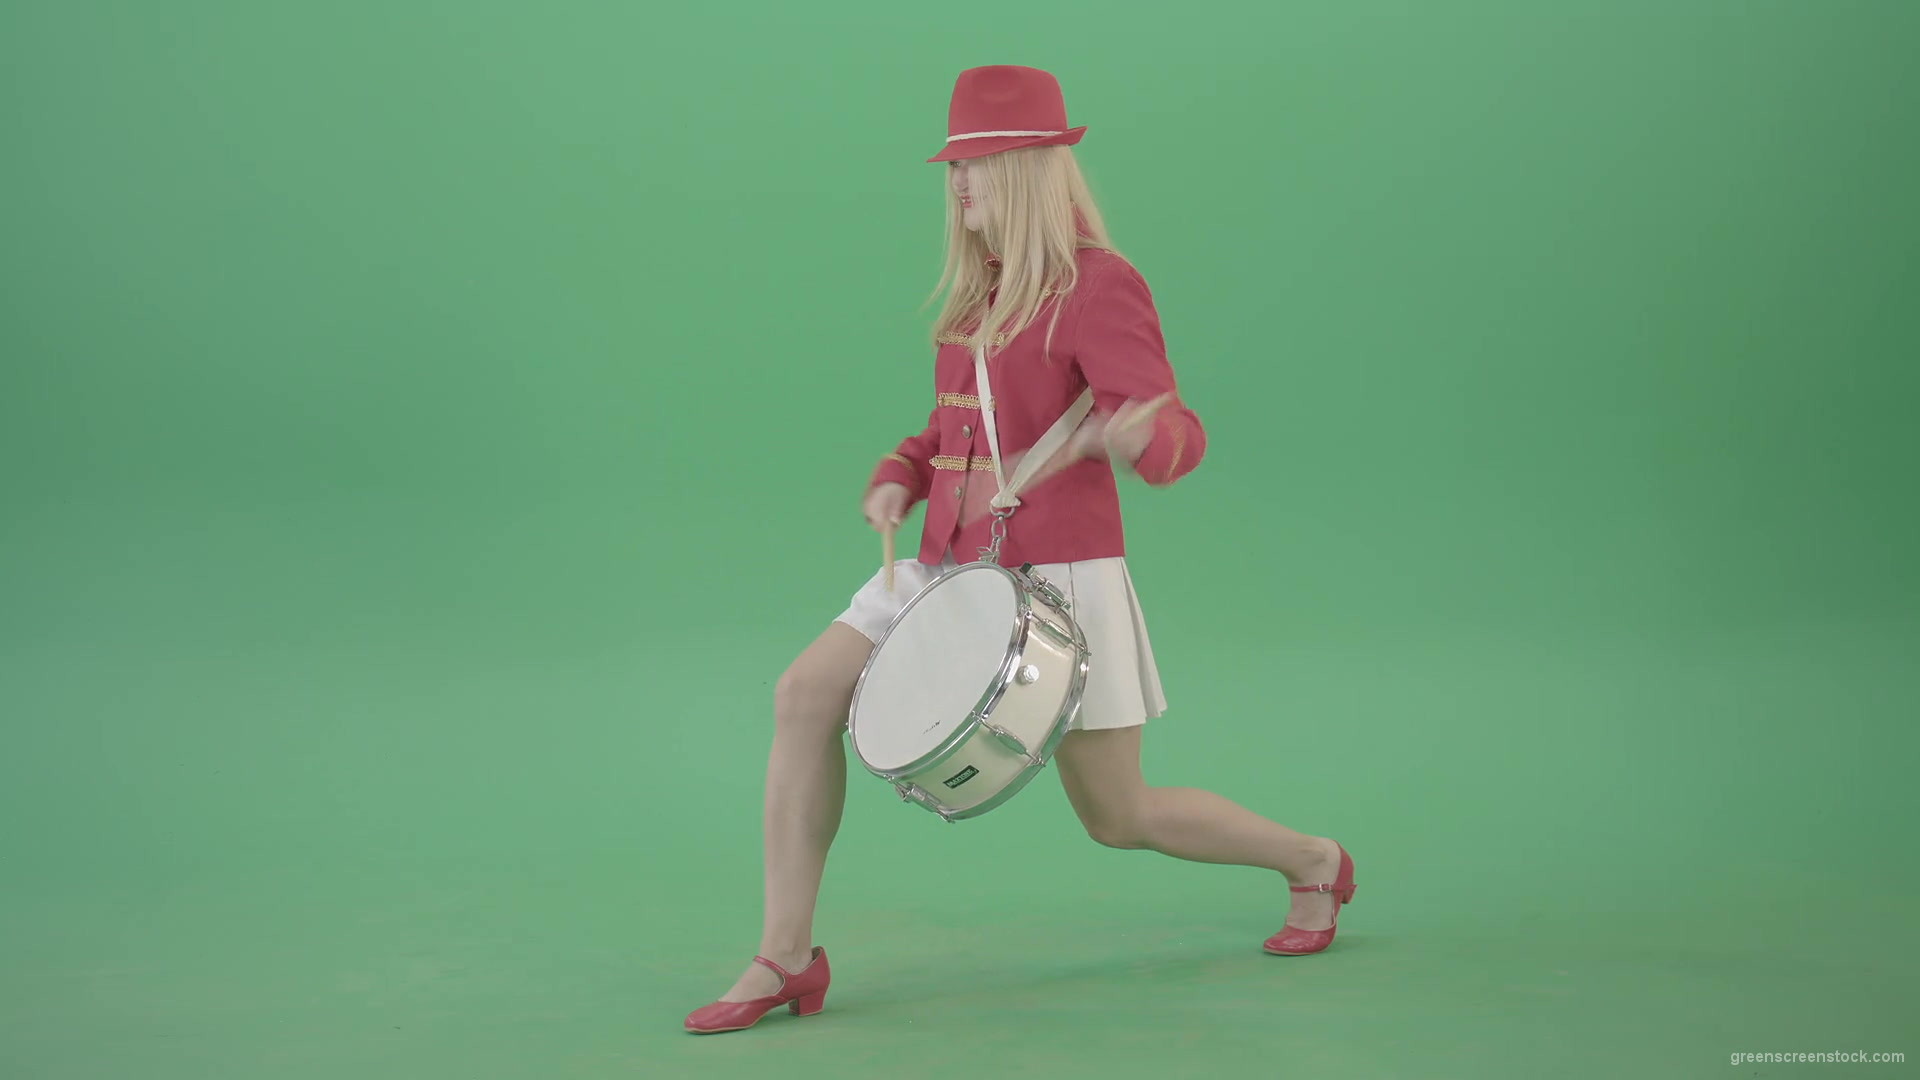 Blondie-is-ready-for-adventure-making-beats-on-snare-drum-isolated-on-Green-Screen-4K-Video-Footage-1920_006 Green Screen Stock